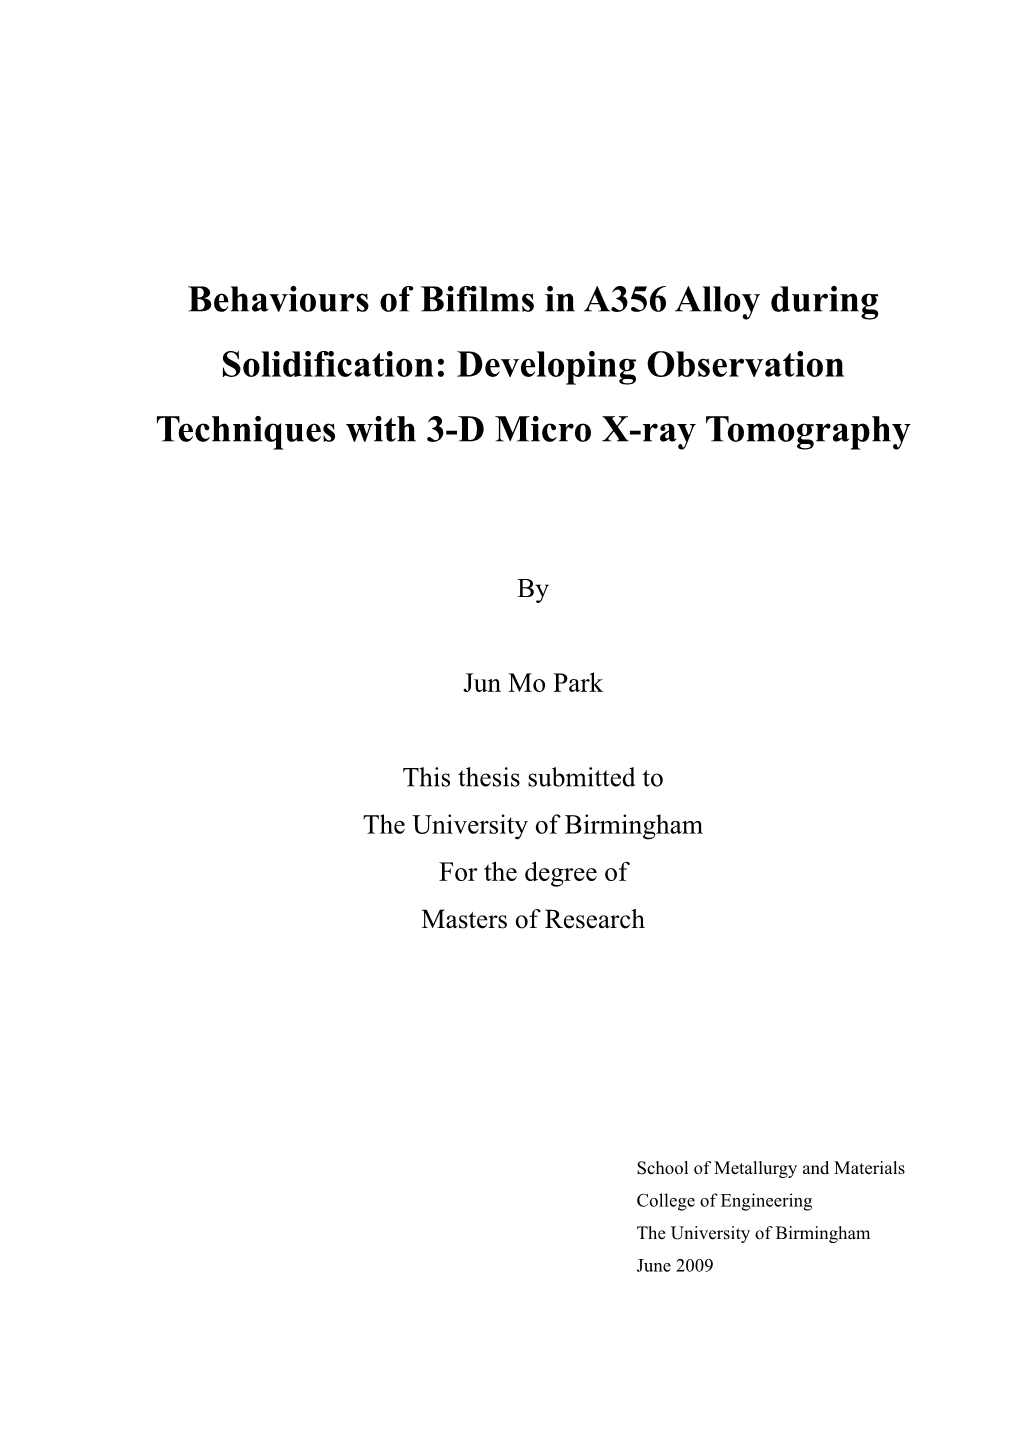 Behaviours of Bifilms in A356 Alloy During Solidification: Developing Observation Techniques with 3-D Micro X-Ray Tomography